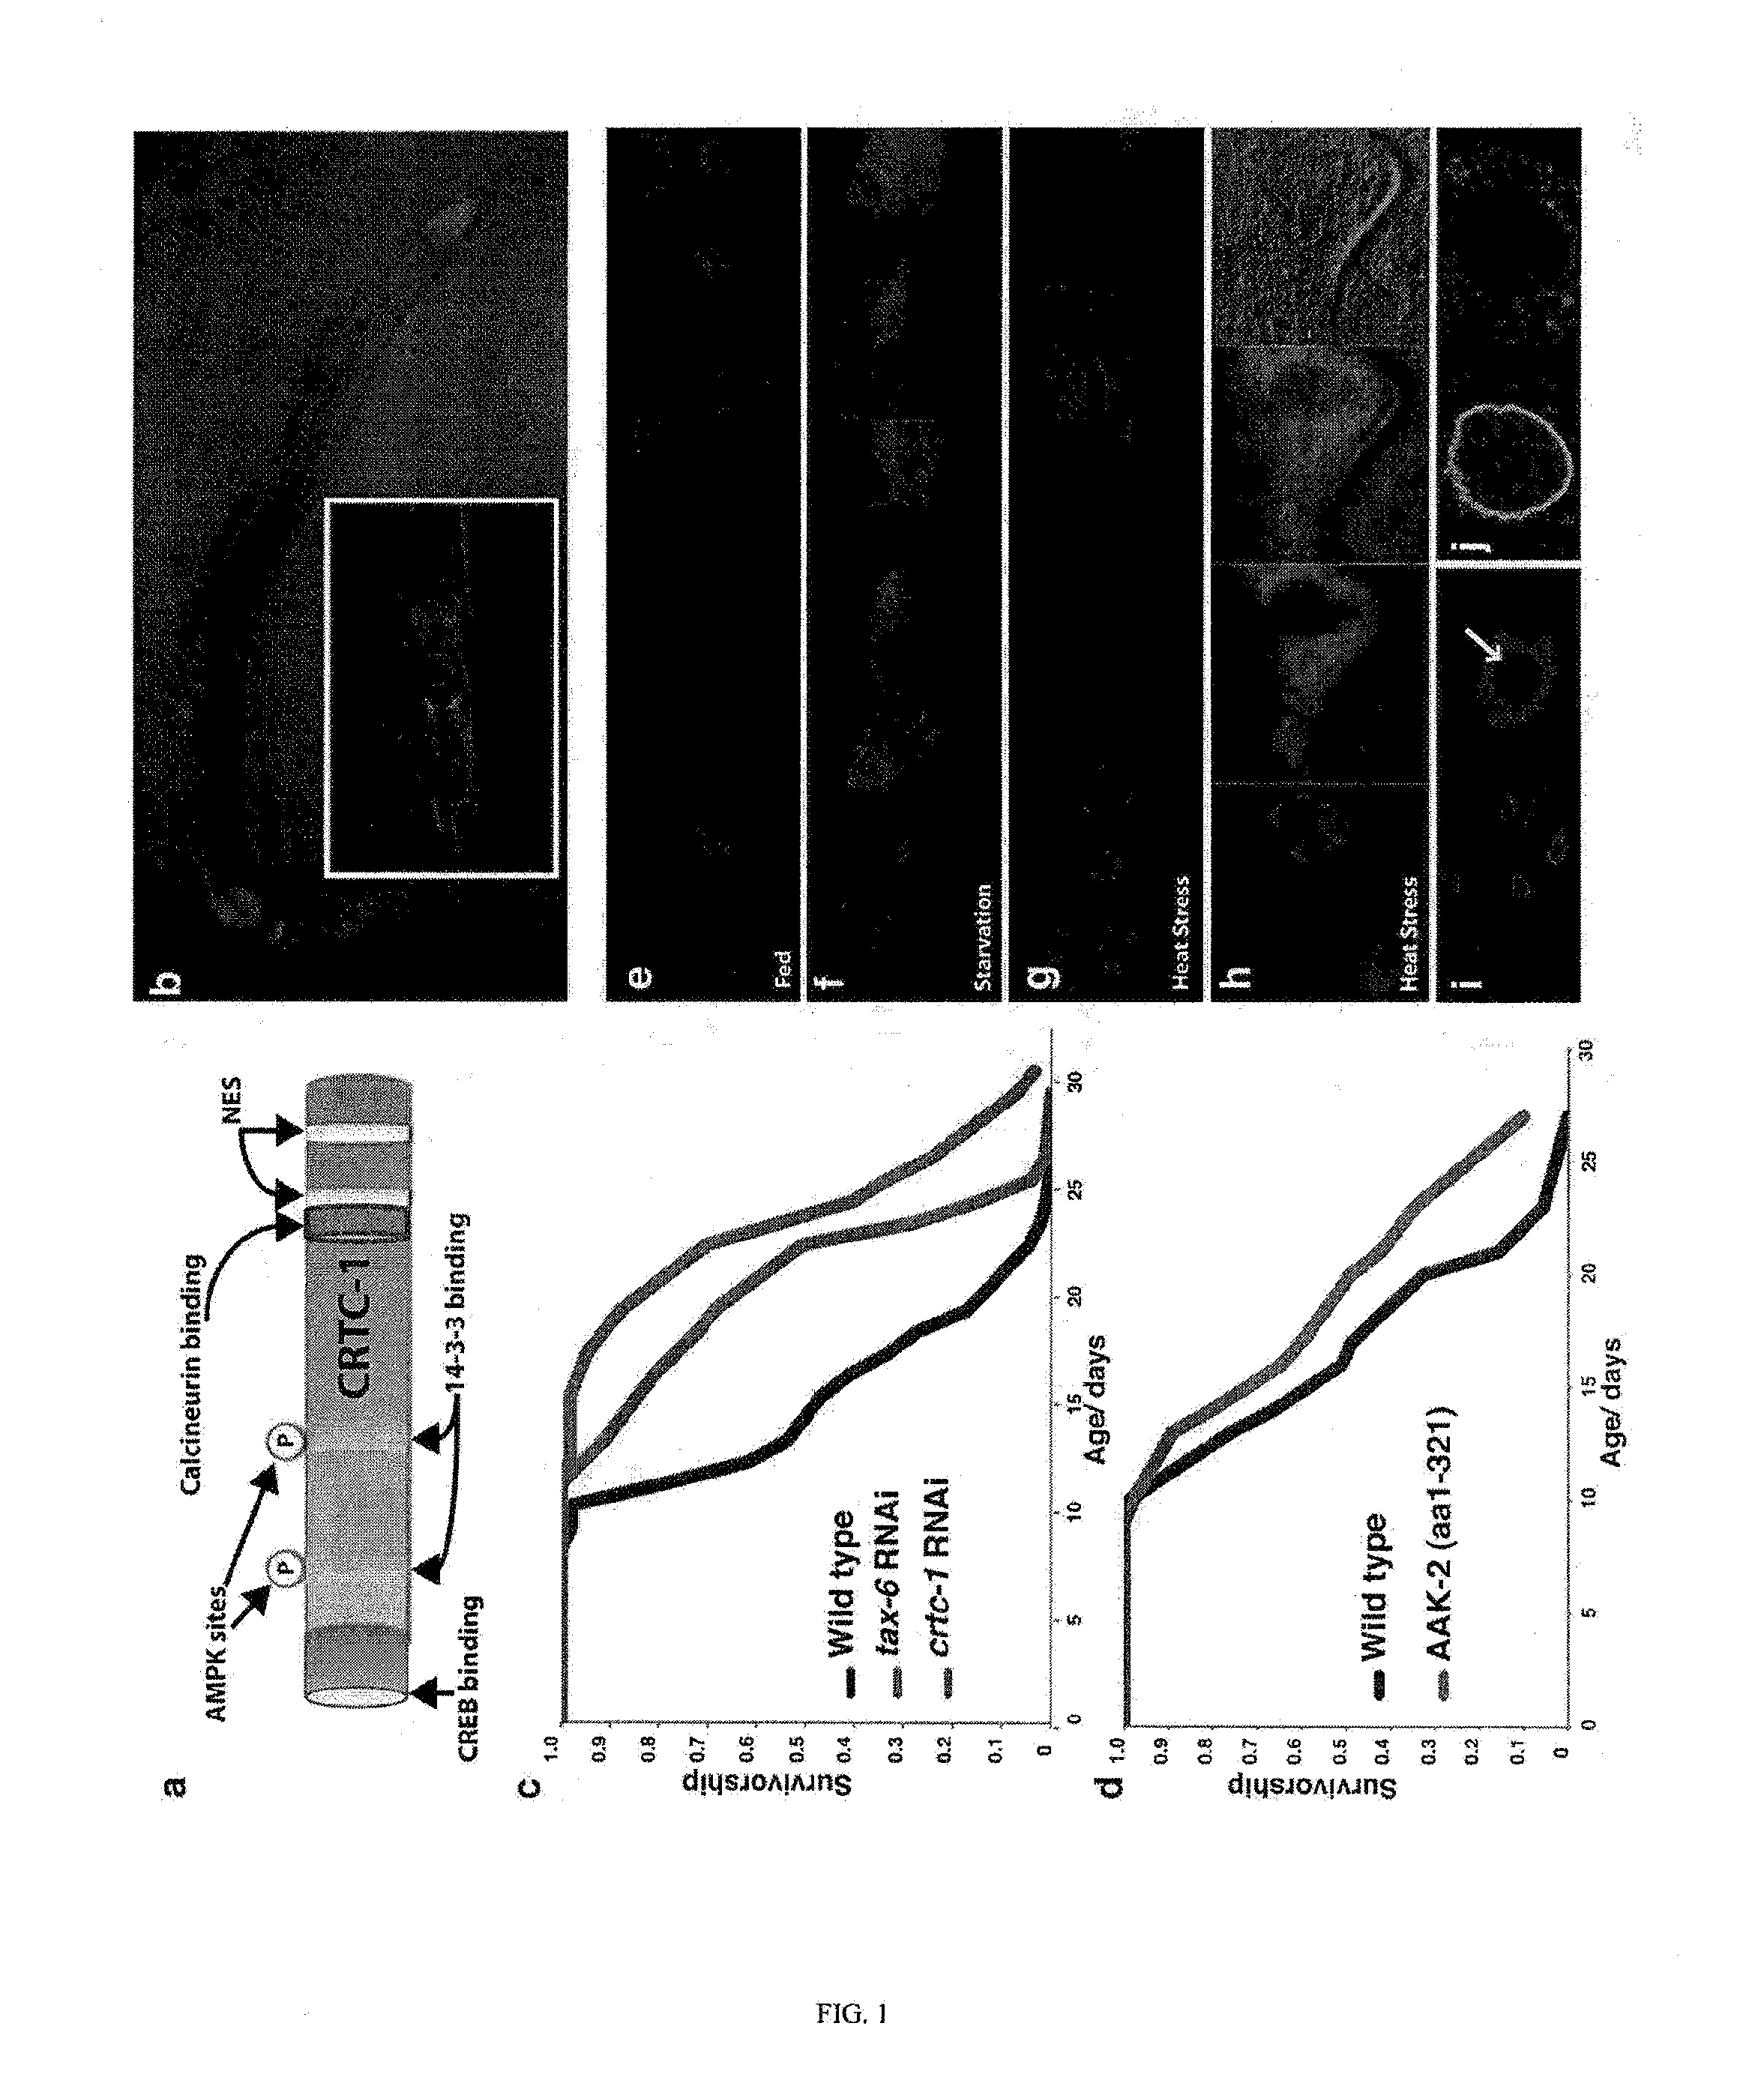 Increasing lifespan by modulating crtc expression or localization, and methods of screening for modulators of same